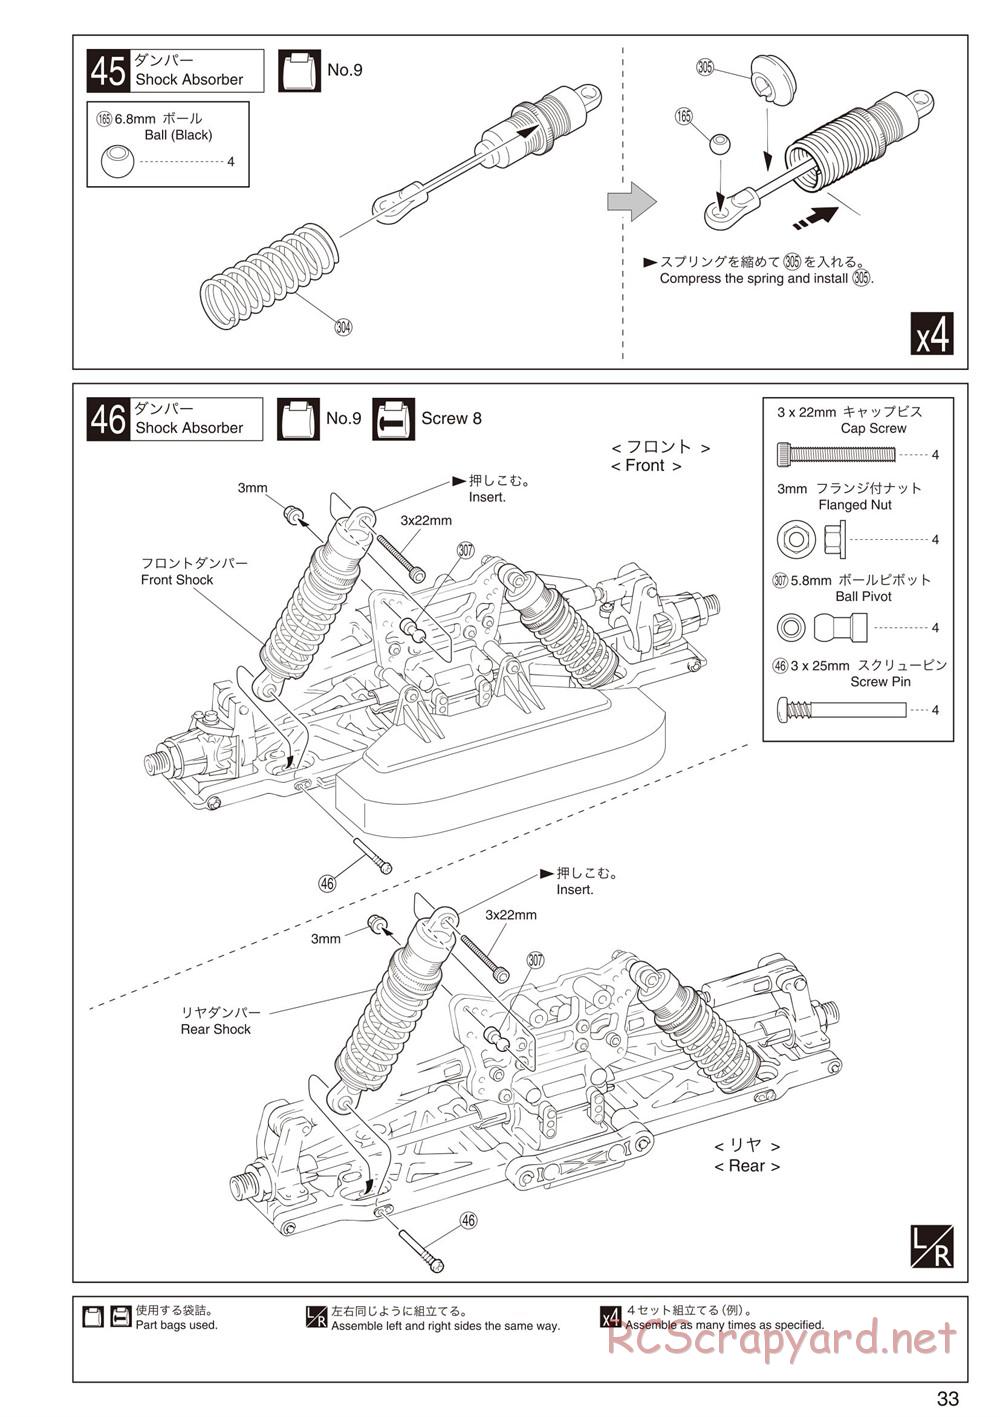 Kyosho - Inferno GT2 - Manual - Page 33